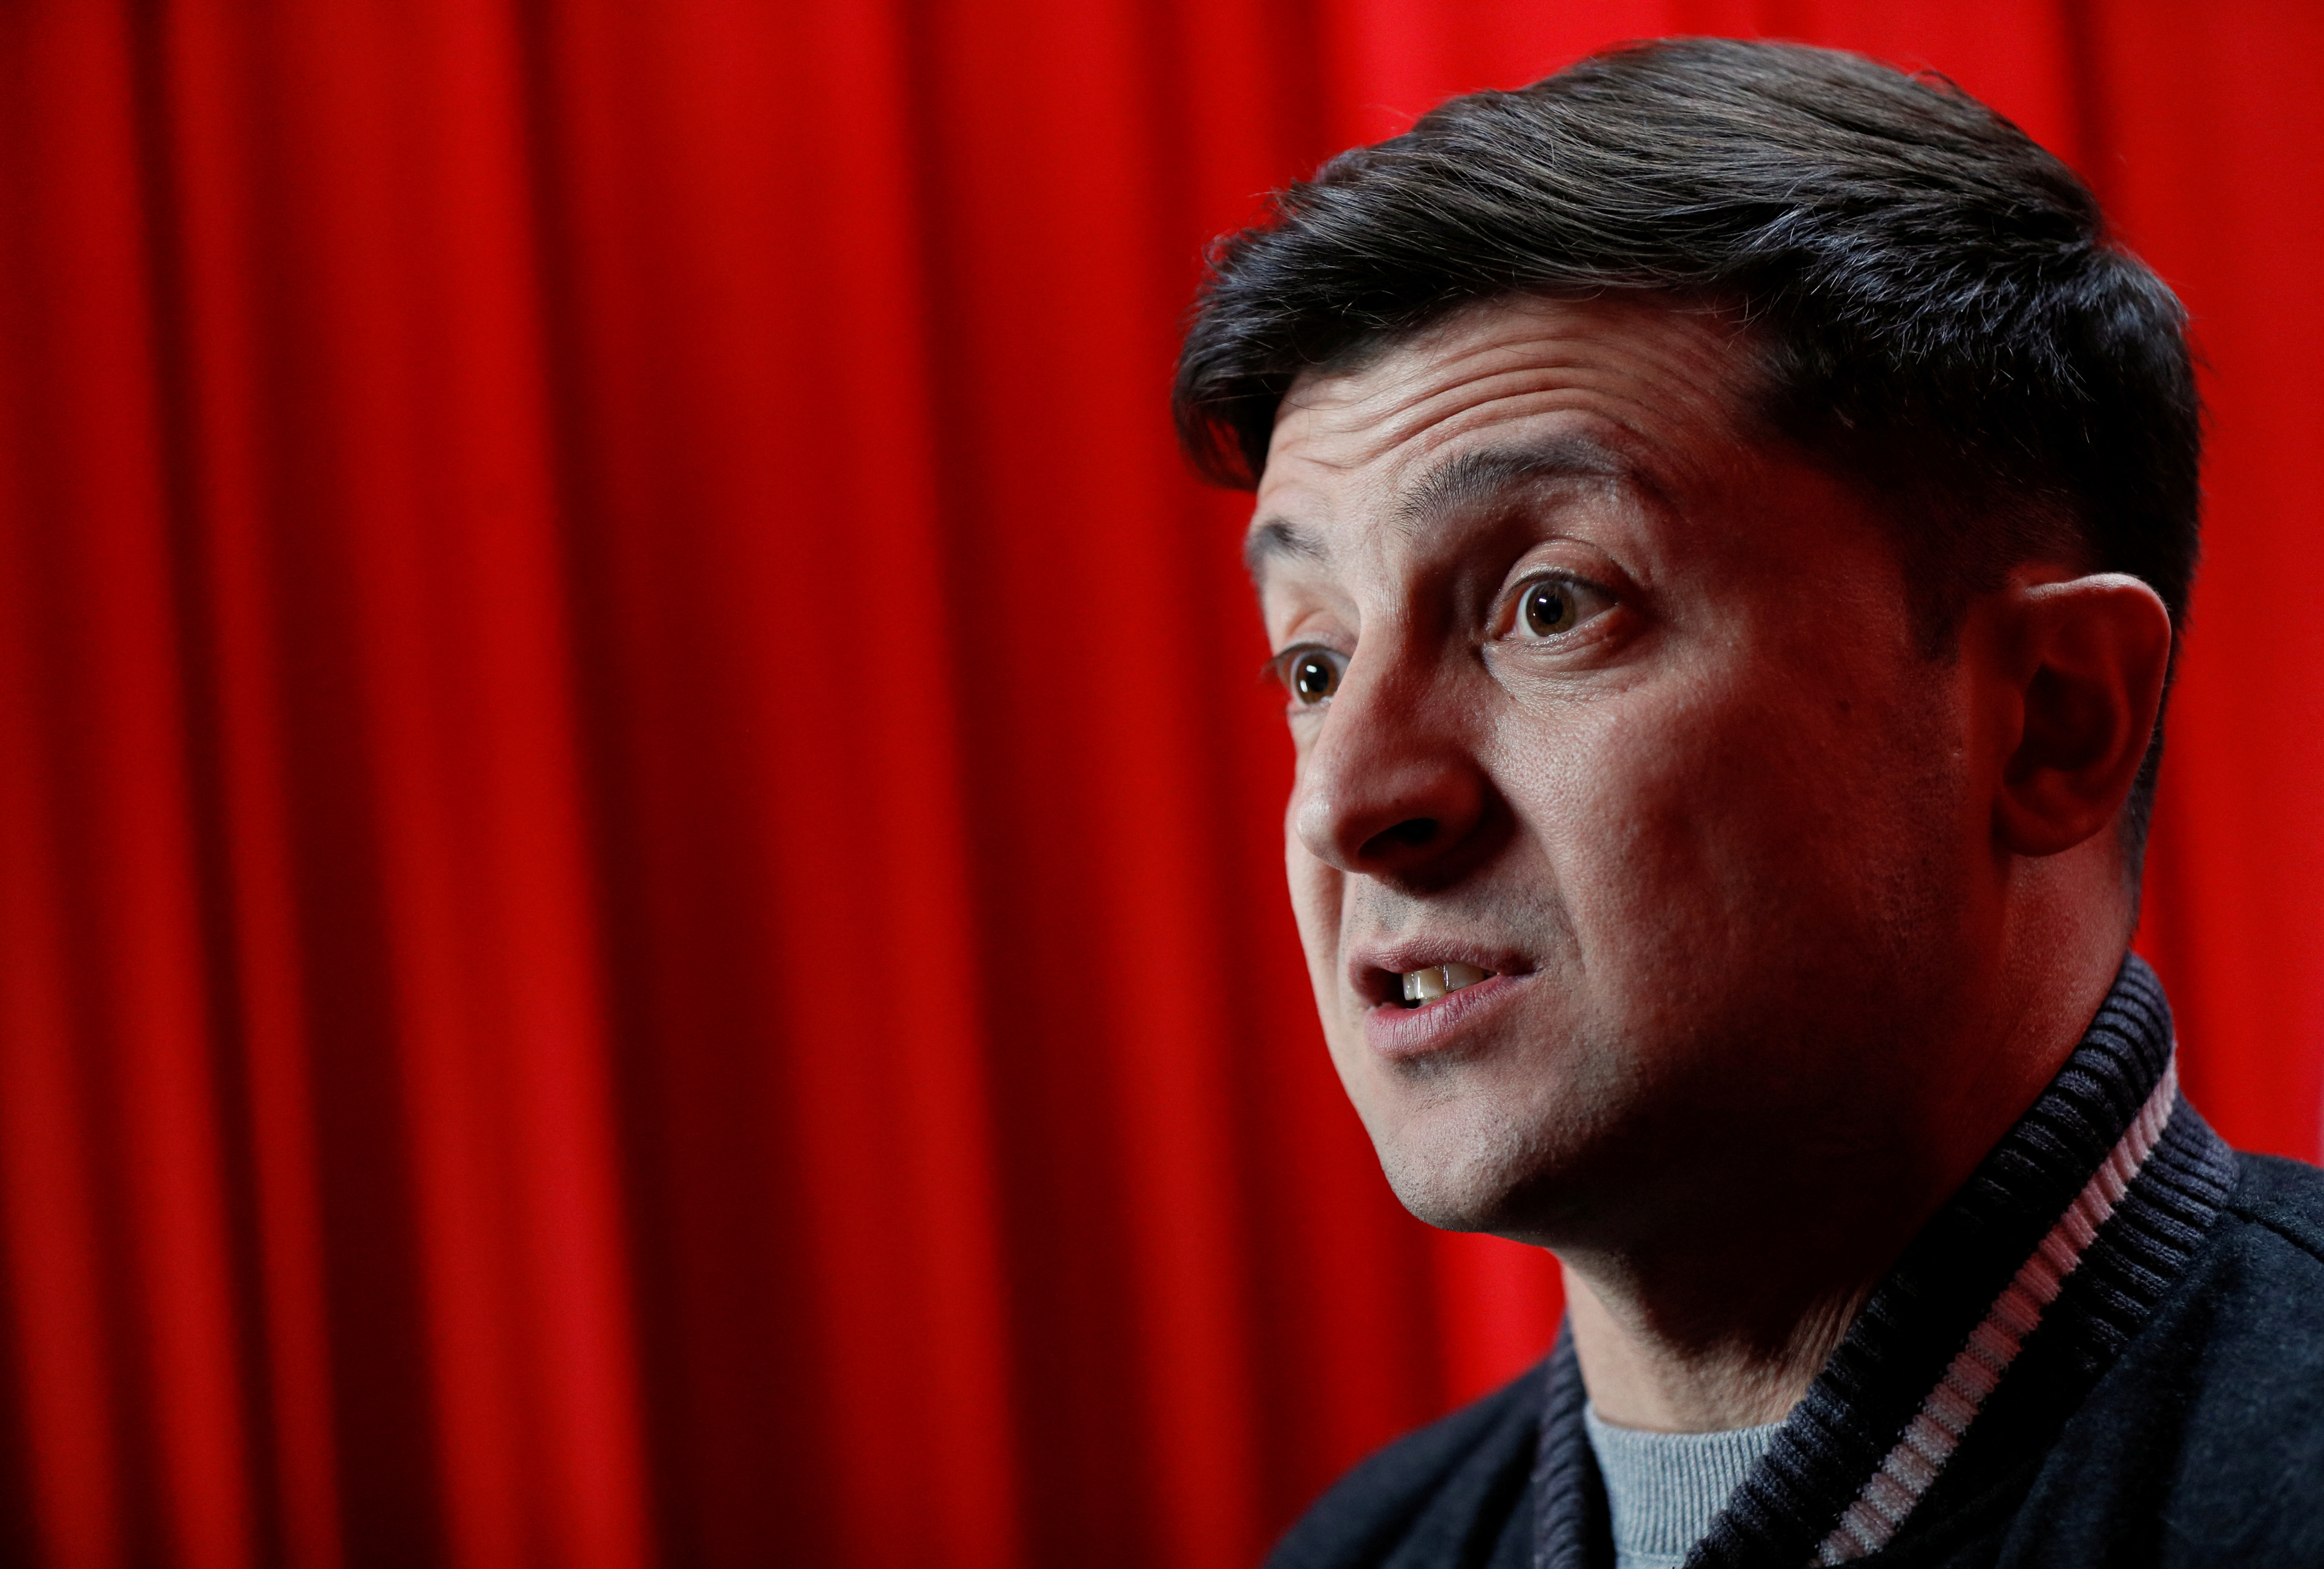 Volodymyr Zelenskiy, Ukrainian actor and candidate in the upcoming presidential election, speaks during an interview with Reuters at a concert hall in Kiev